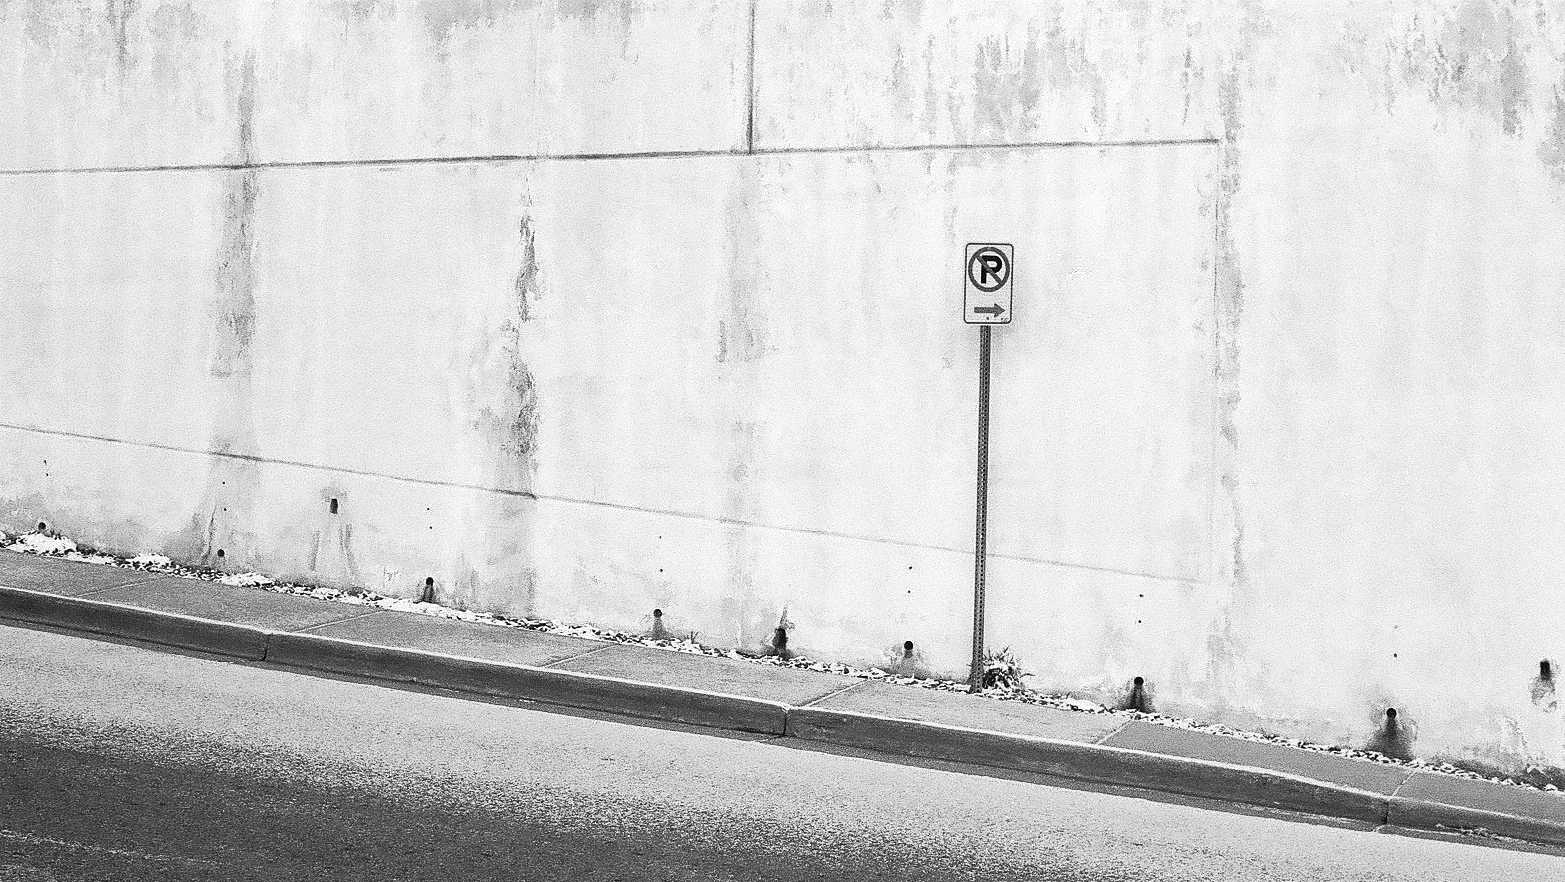 A no parking sign in front of a concrete wall